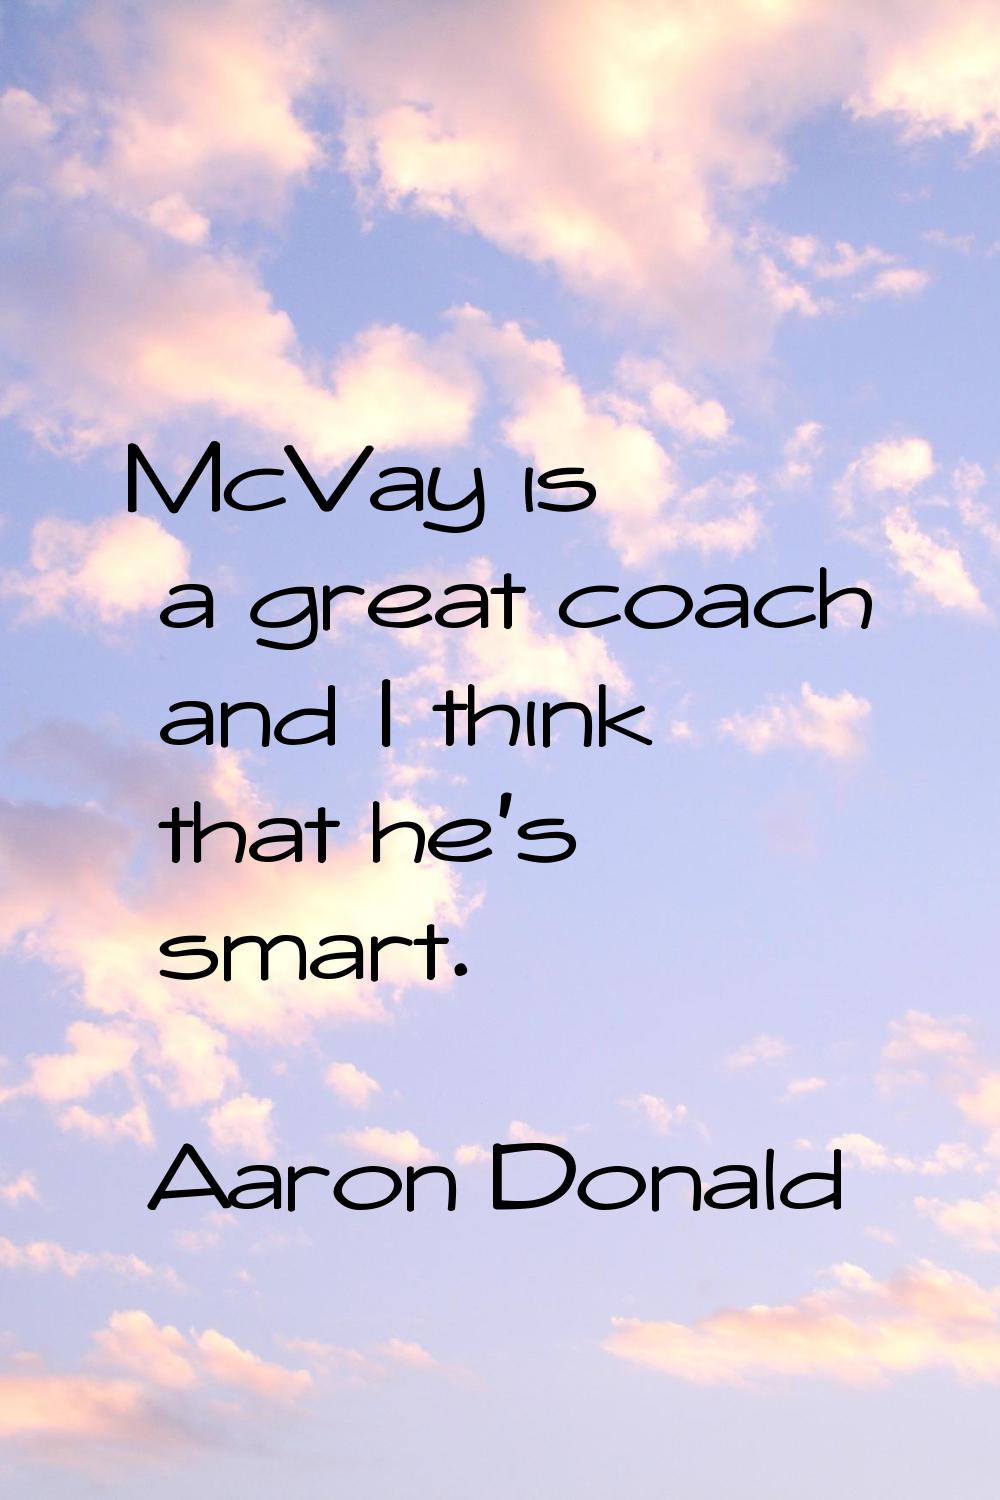 McVay is a great coach and I think that he's smart.